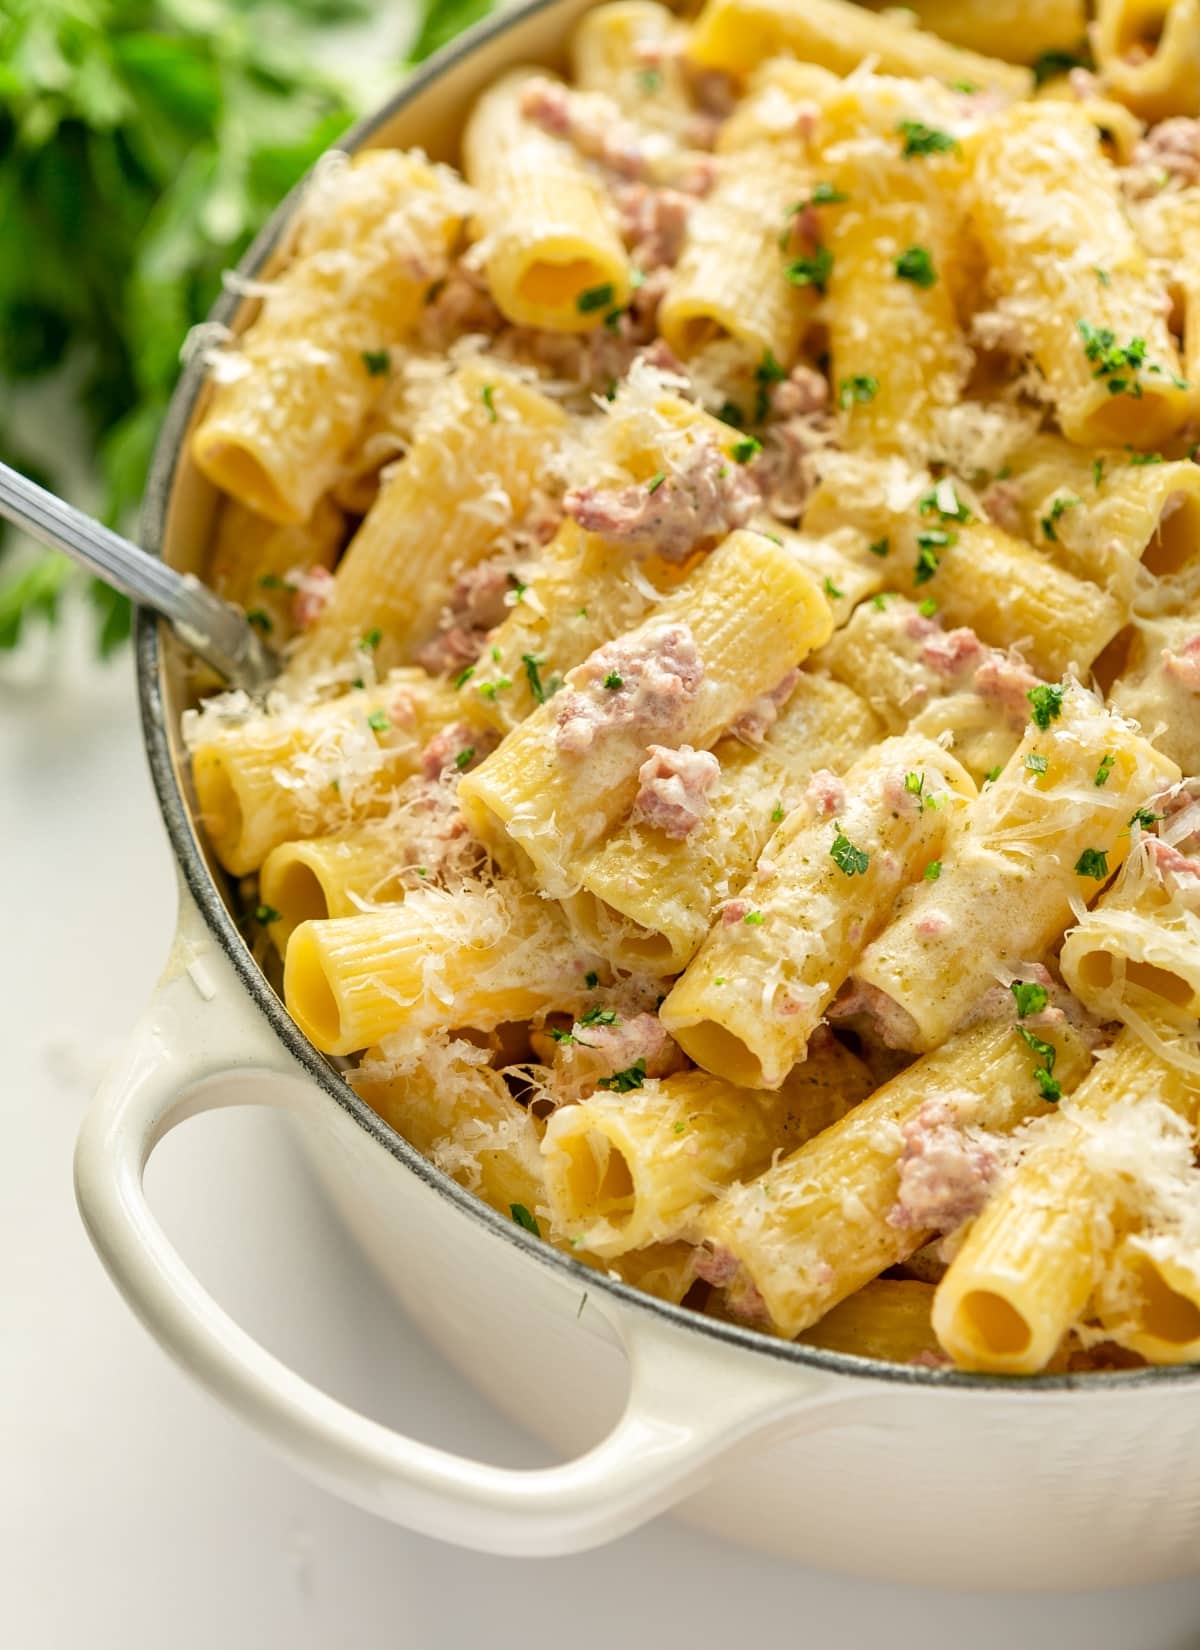 pasta norcina with sausage and cream.